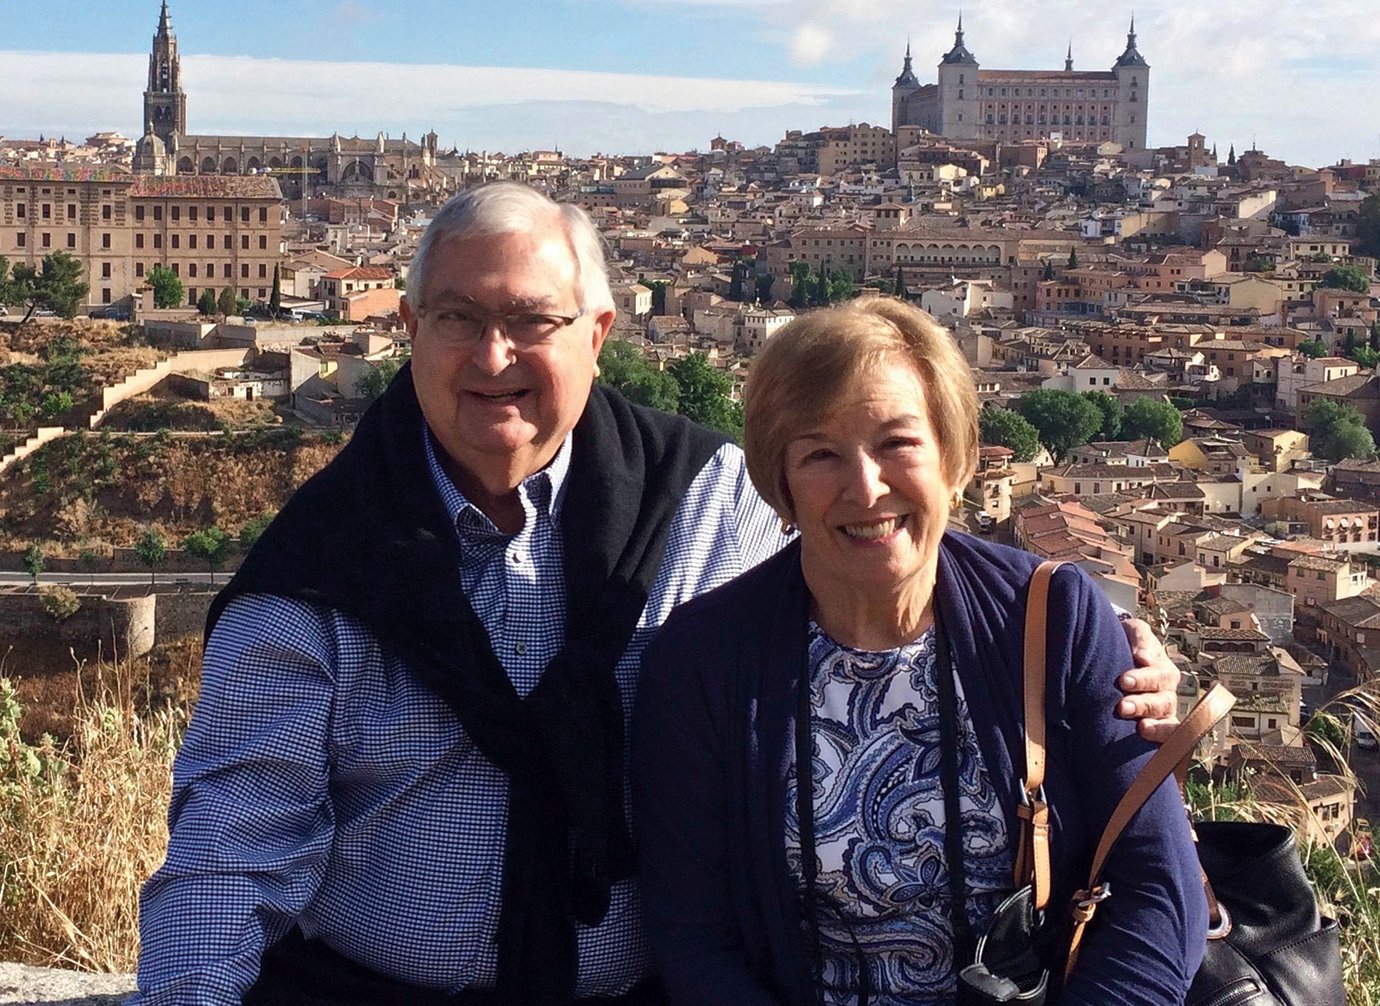 Walter and Donna Young stand smiling in front of European city with cathedrals in the background